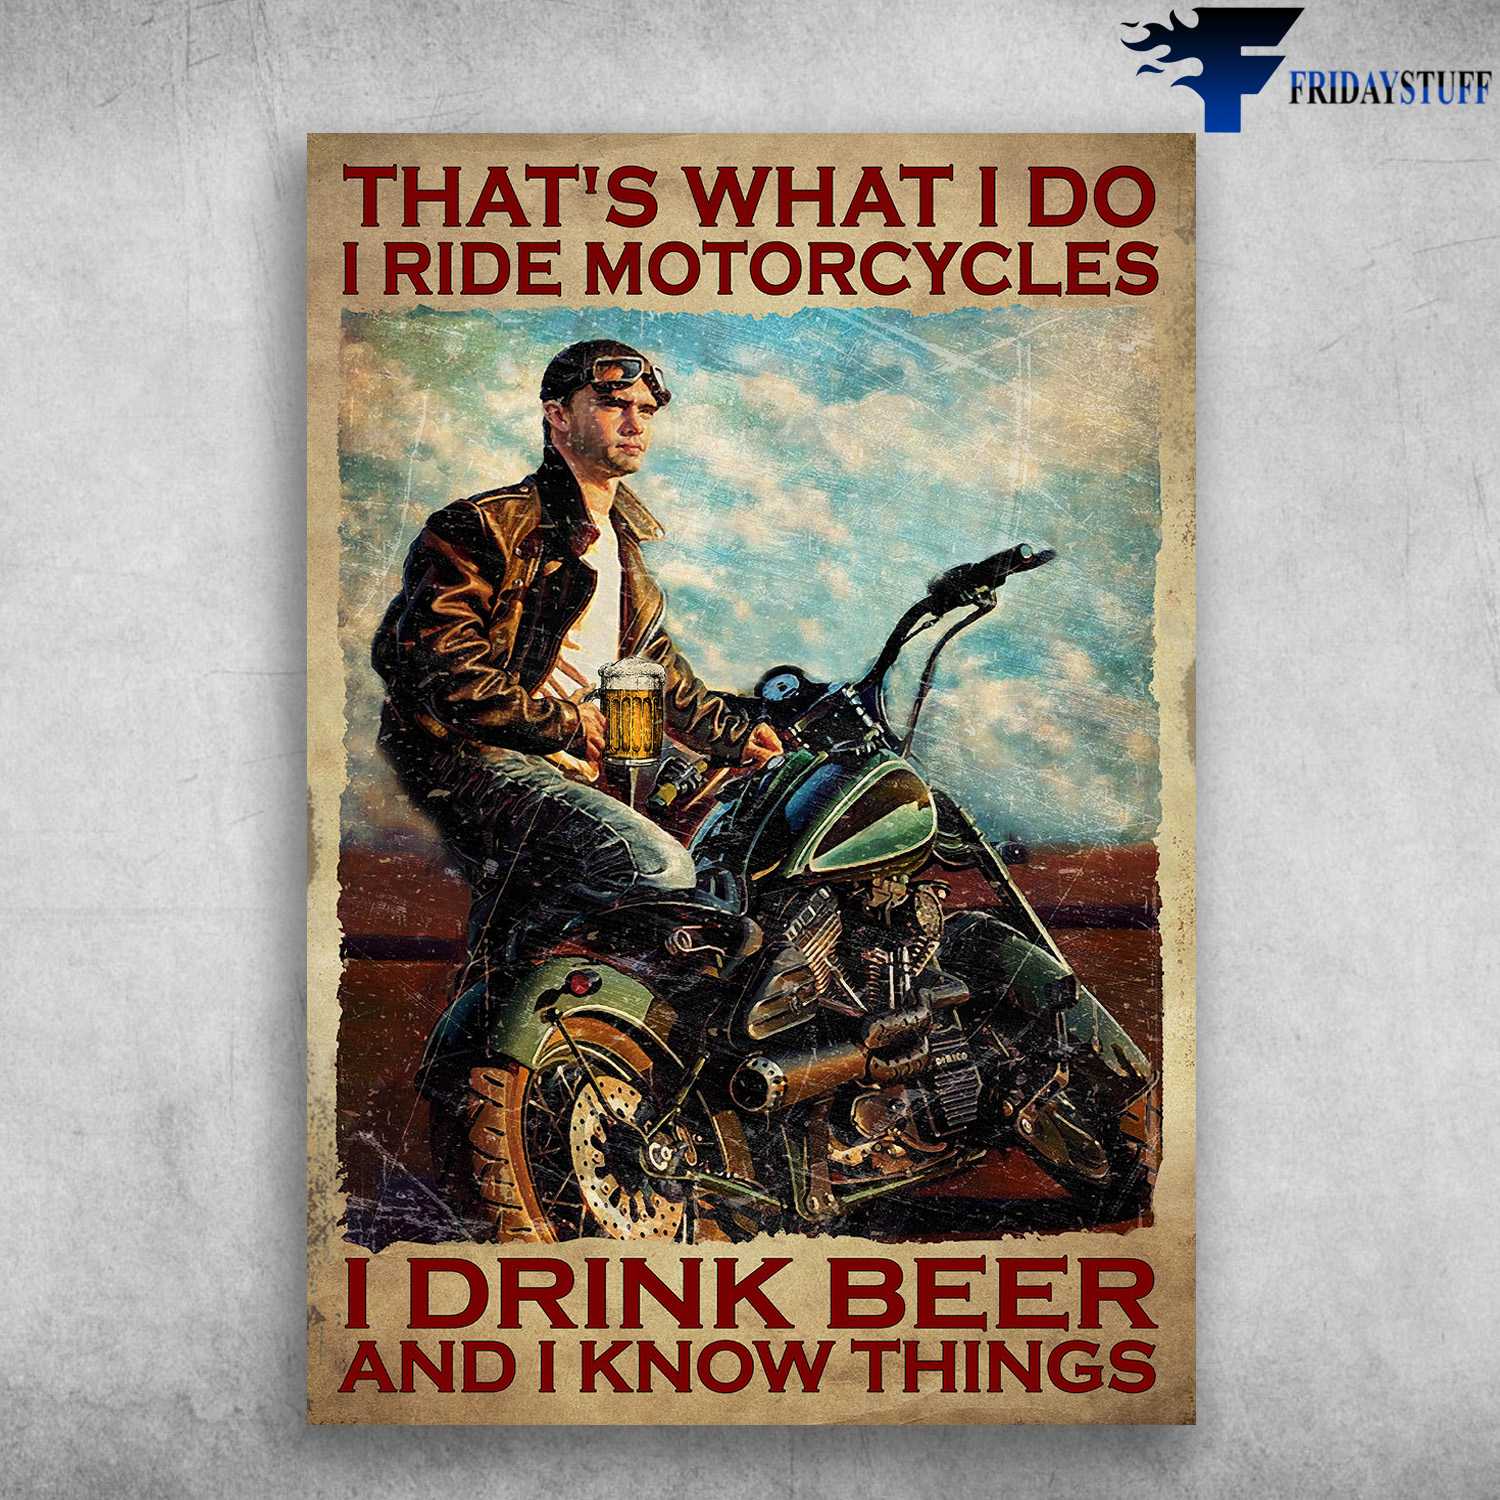 Motorcycle Man, Beer Riding, Biker Lover - That's What I Do, I Ride Motorcycles, I Drink Beer, And I Know Things